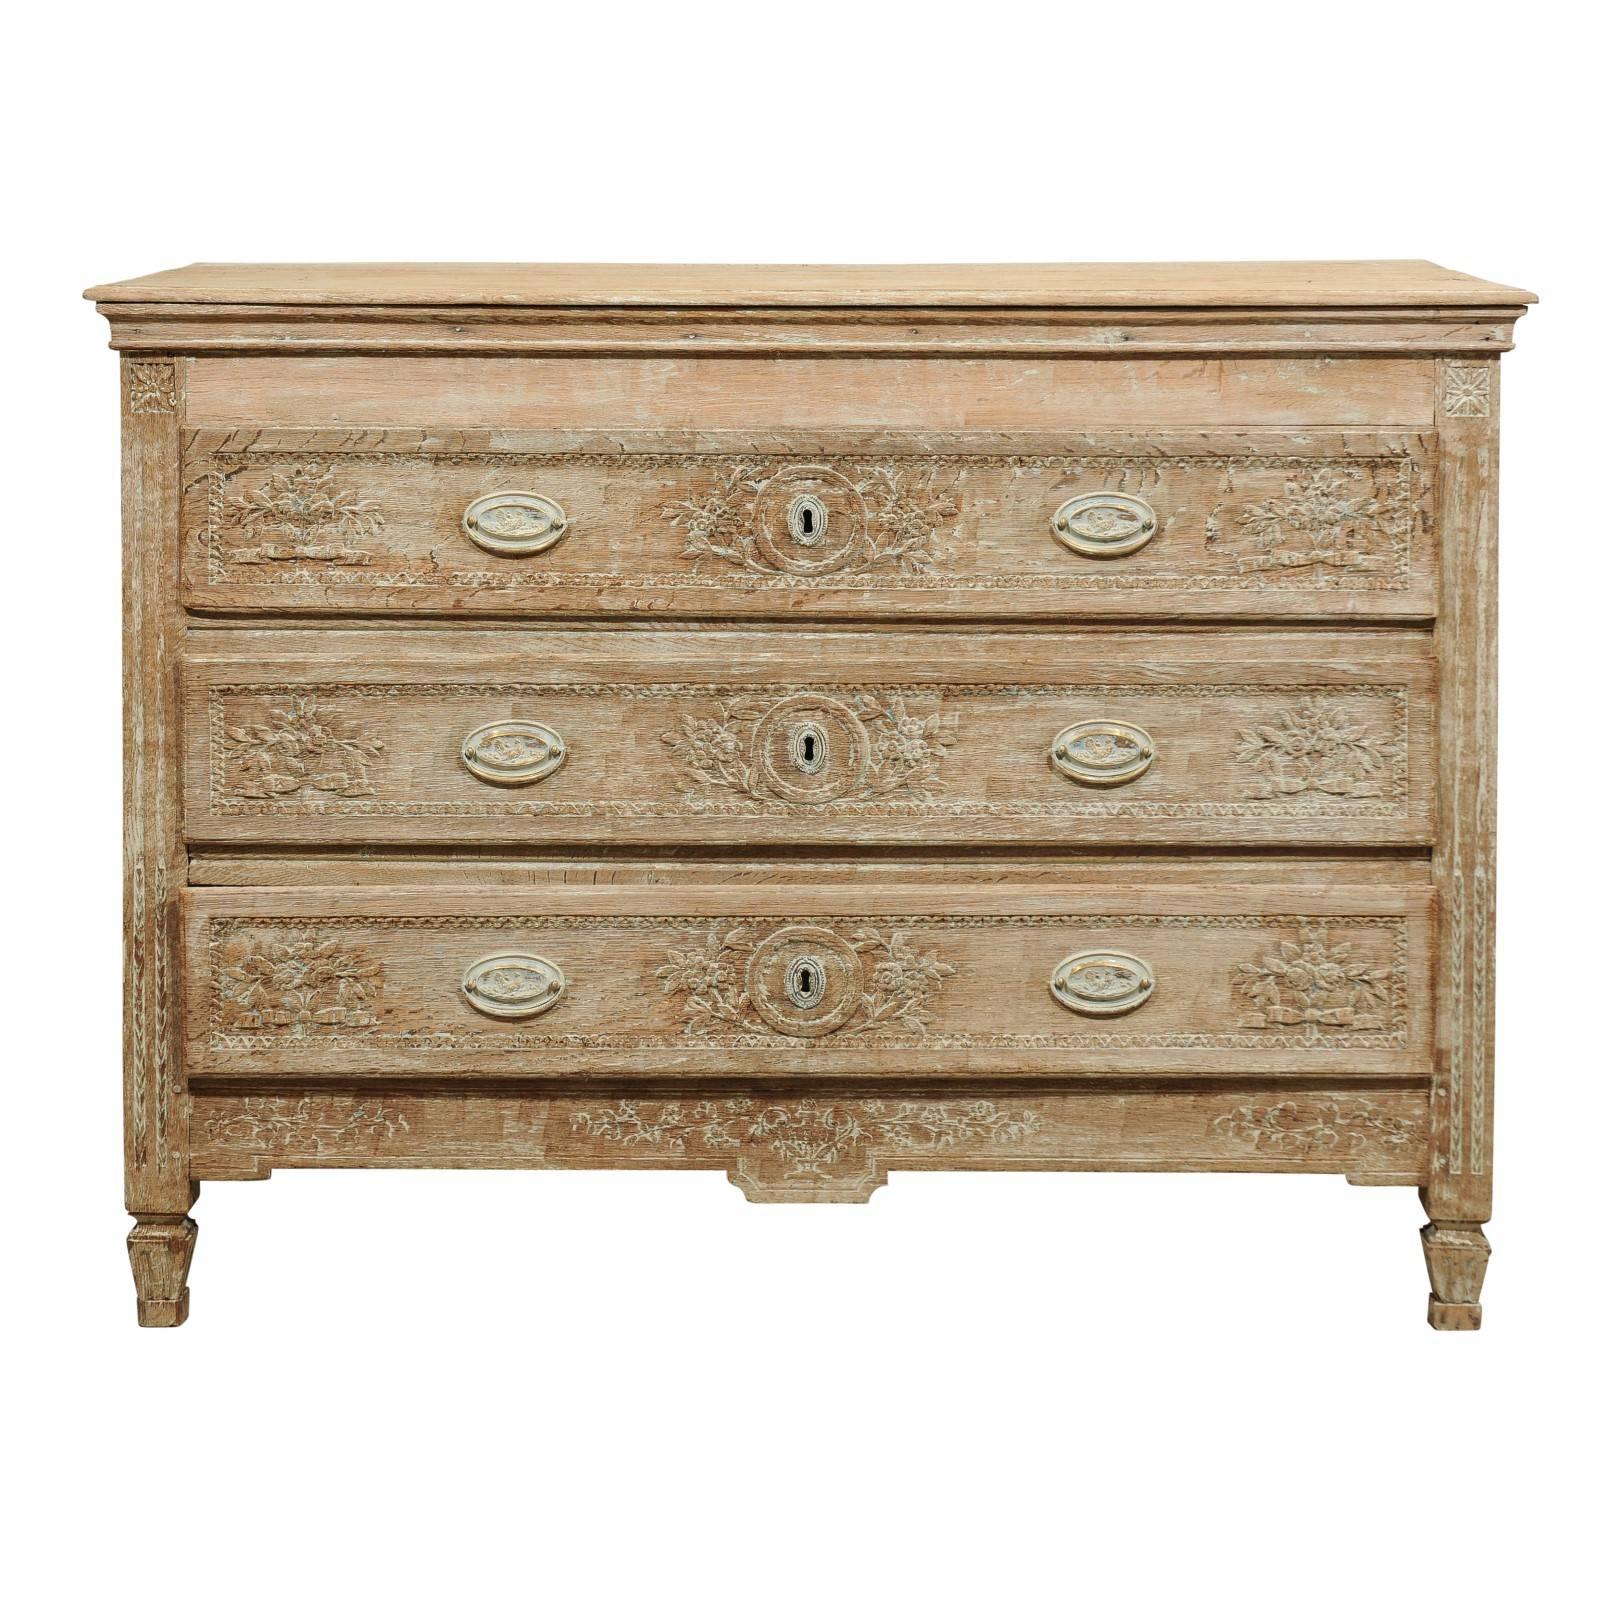 French Louis XVI Period Bleached Oak Commode with Floral Décor, circa 1790